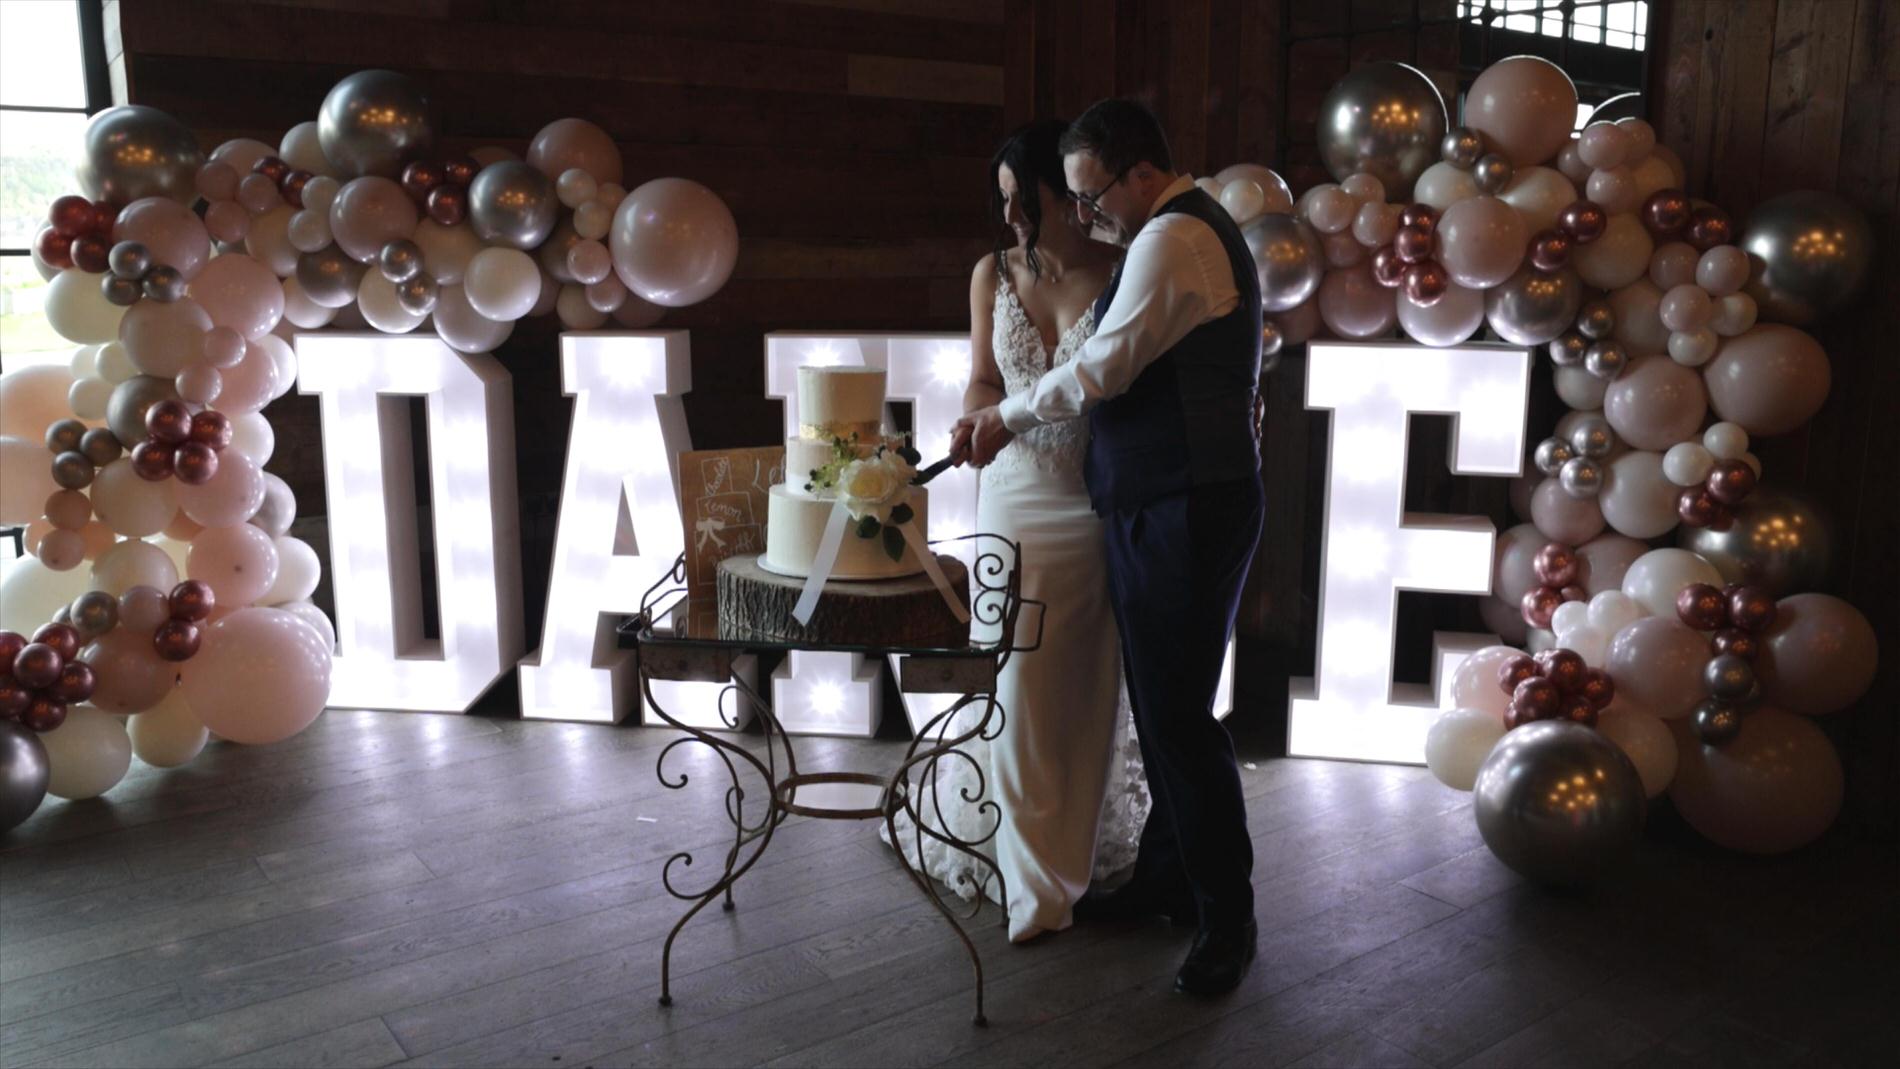 couple cut the cake in front of large light up dance letters